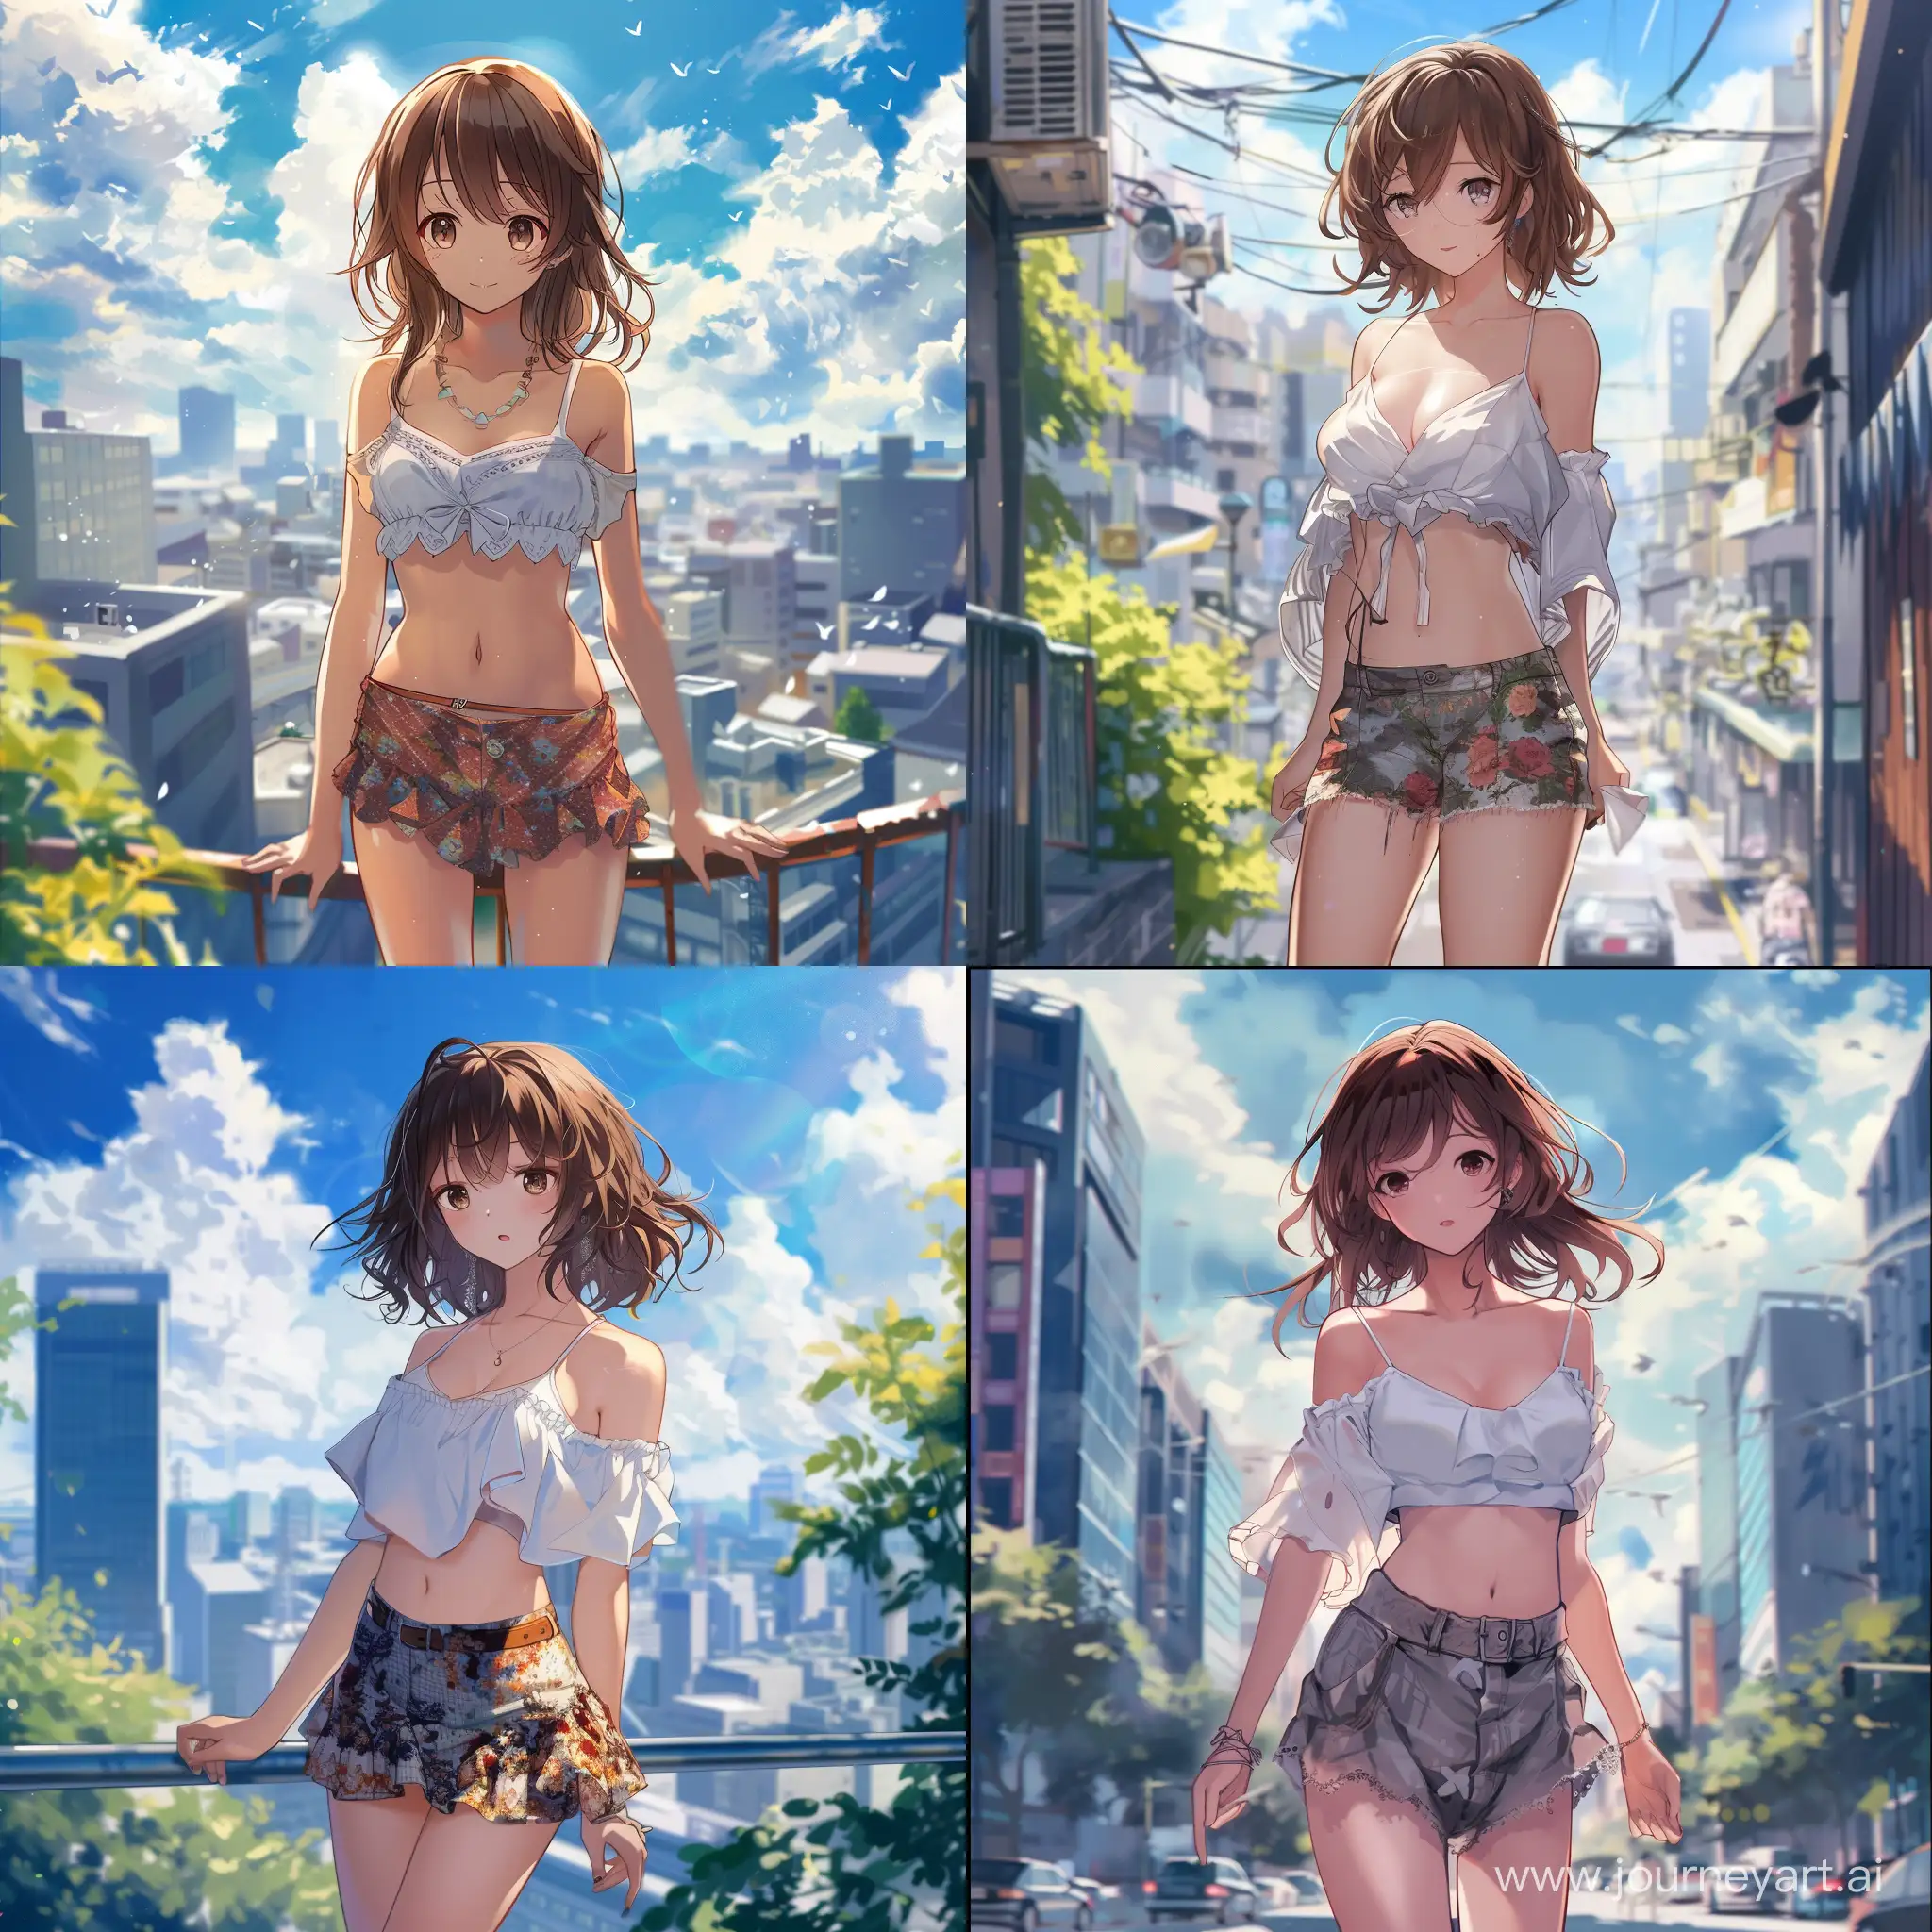 Cute-BrownHaired-Anime-Girl-Exploring-City-in-Stylish-Outfit